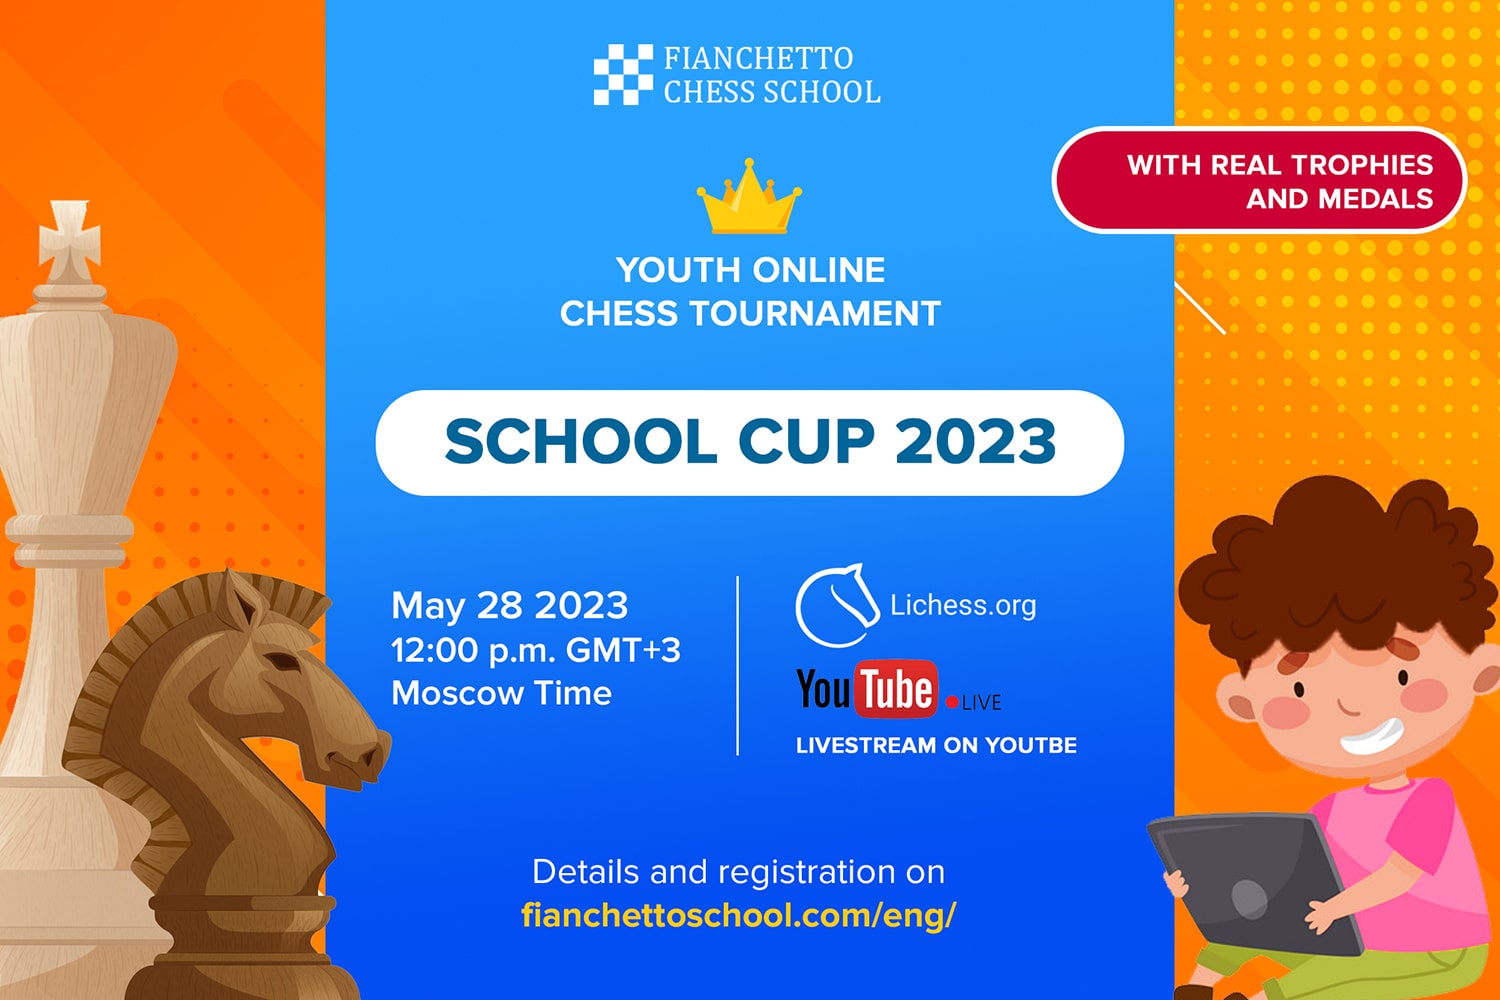 FIANCHETTO SCHOOL CHESS CUP 2023 - ONLINE YOUTH TOURNAMENT